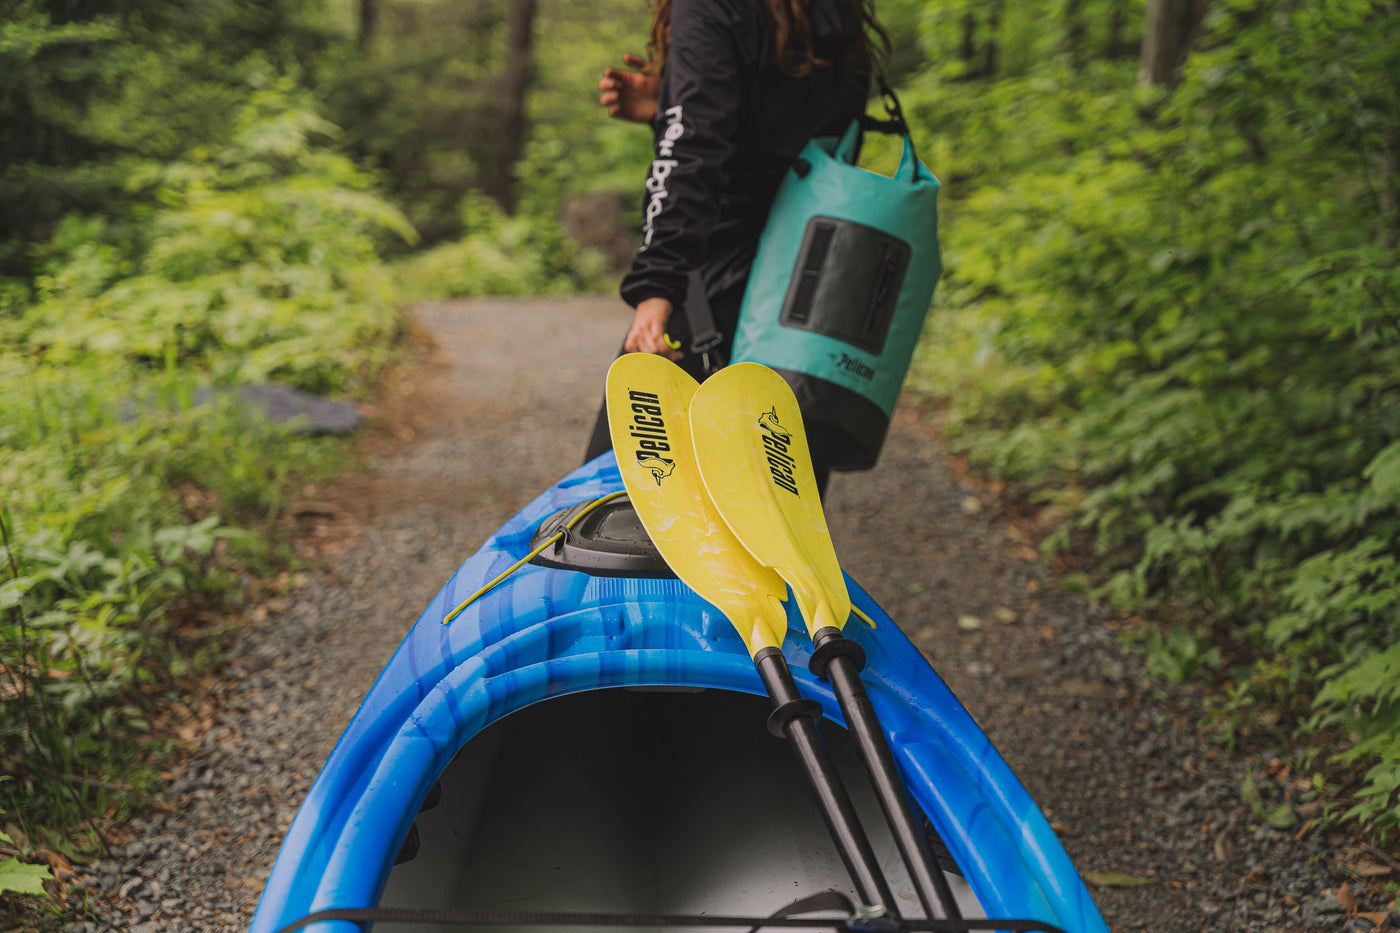 Pelican Argo 100X Kayak with a yellow paddle and a Pelican Exocool Dry bag